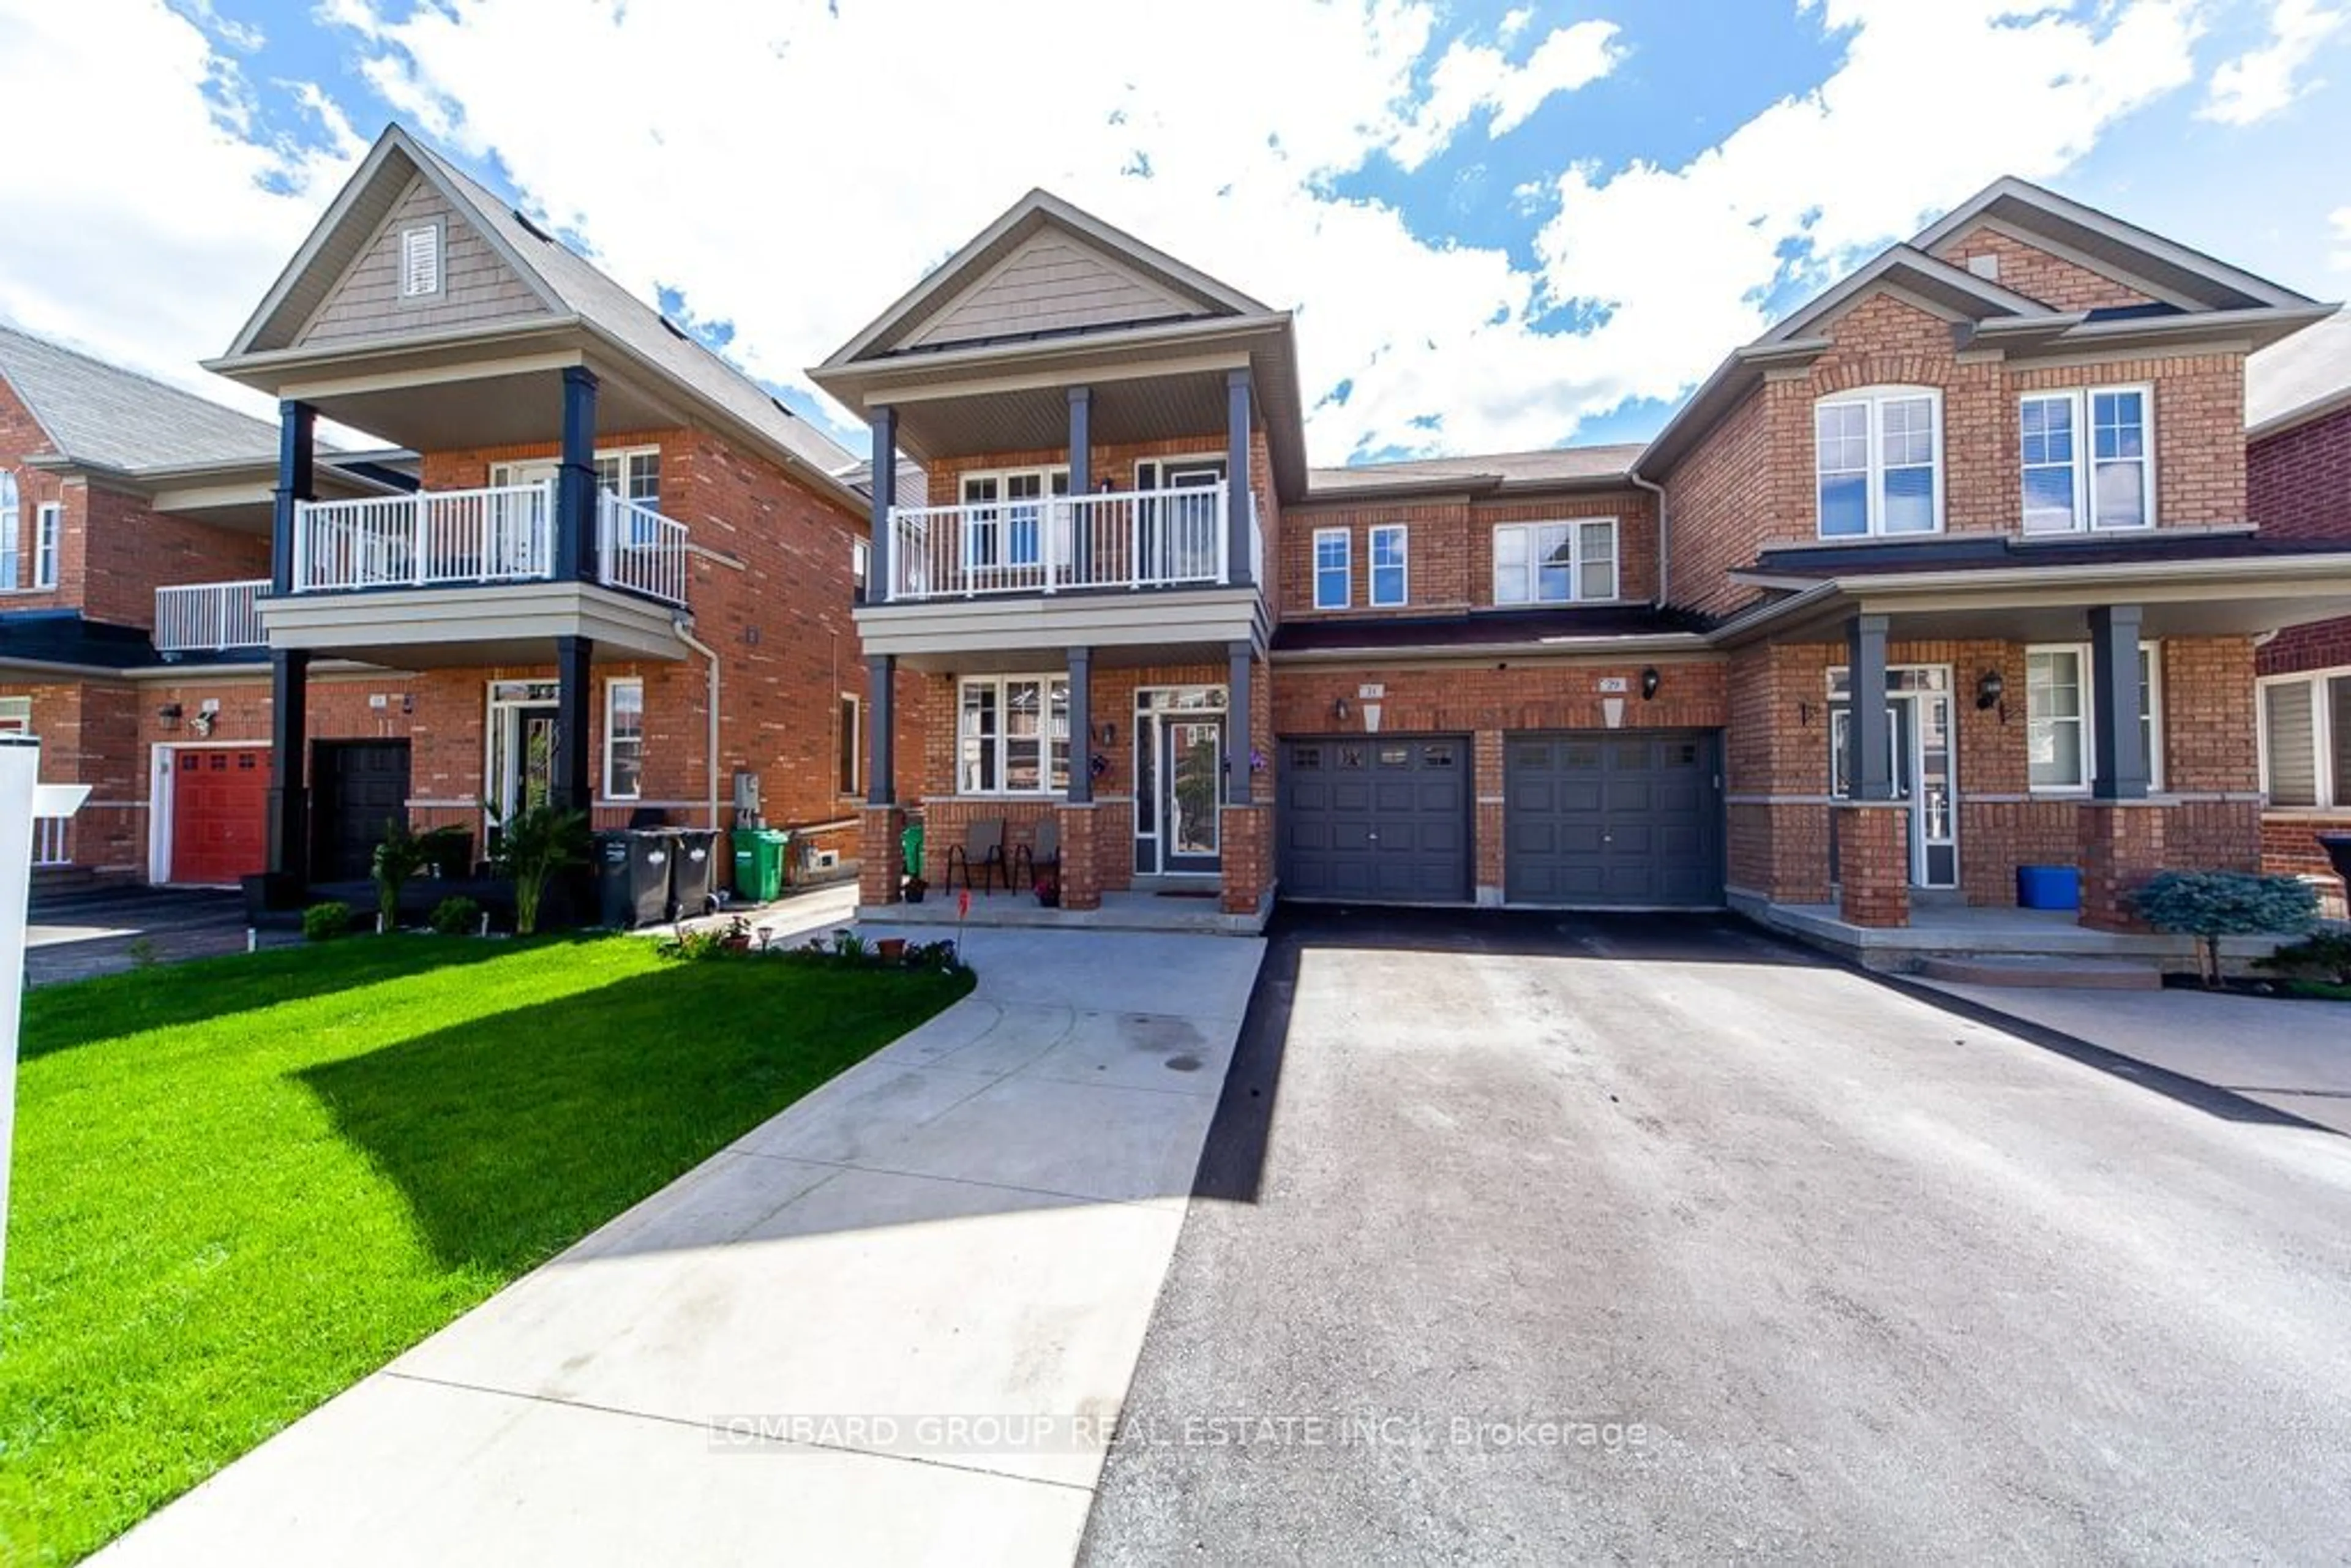 Home with brick exterior material for 31 Iceland Poppy Tr, Brampton Ontario L7A 4M4